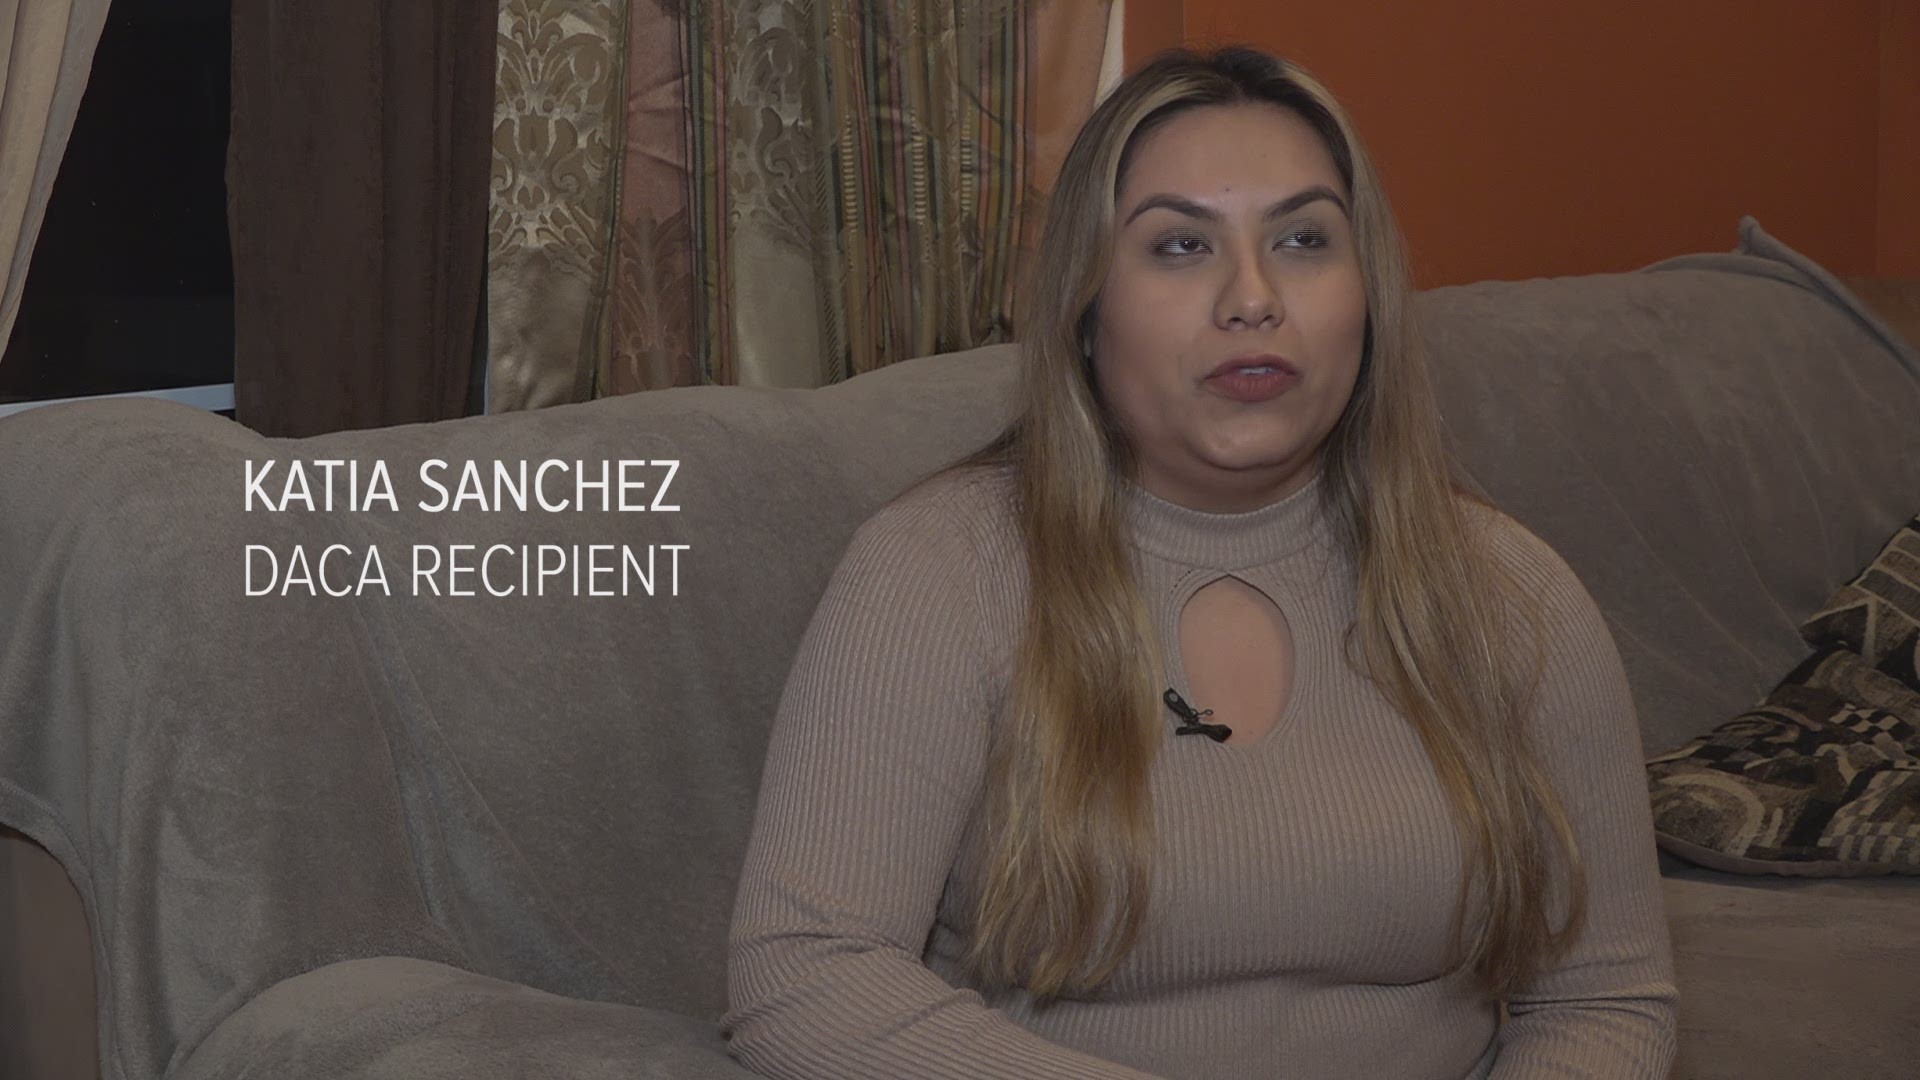 Katia Sanchez criticized the President for bargaining with DACA, but wasn’t surprised.